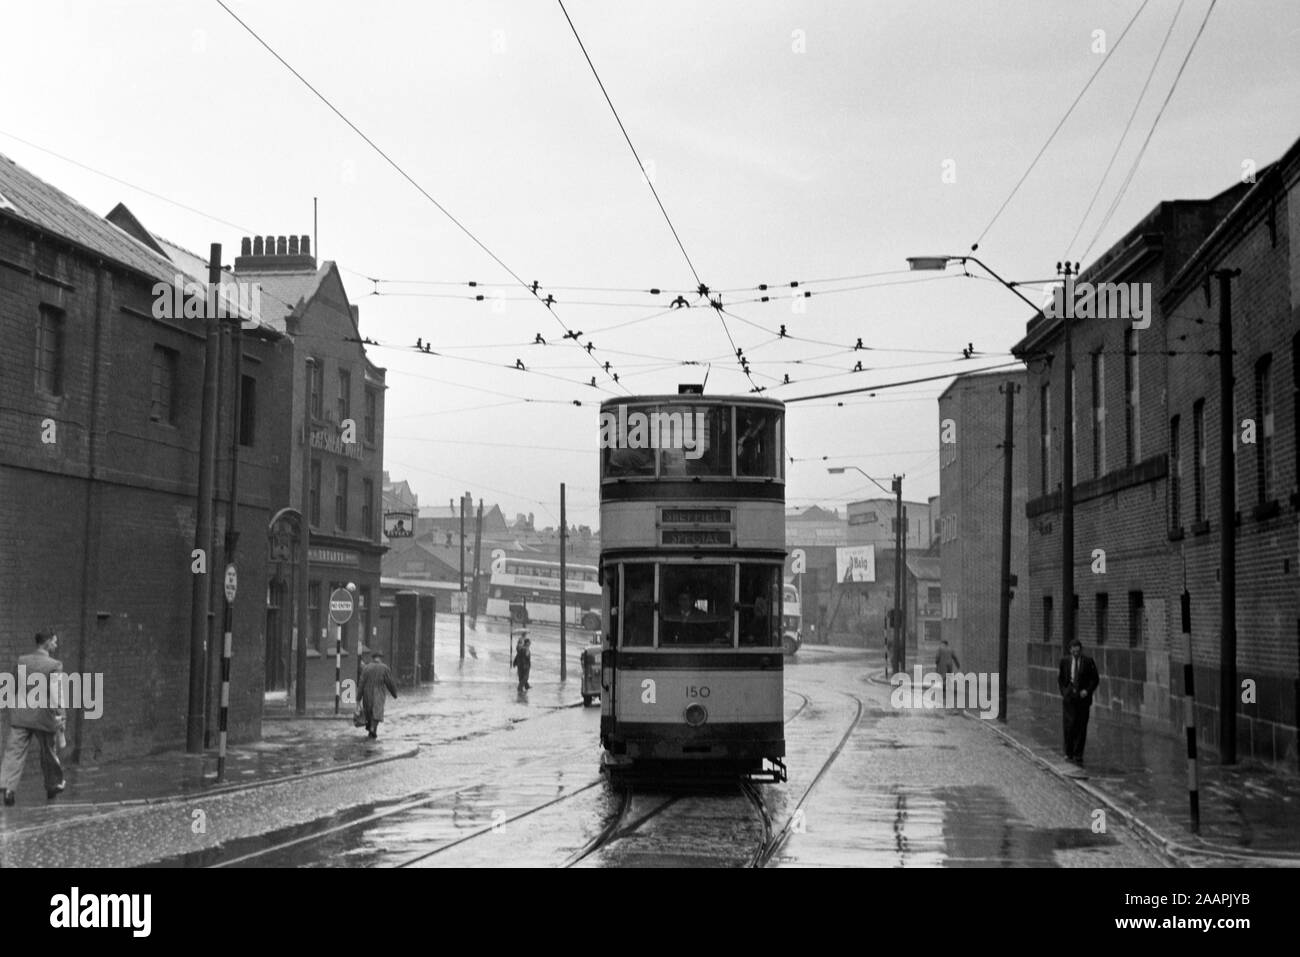 Sheffield Standard Tram No 150 outside the Wheatsheaf Hotel, No. 13, Bridge Street. The building was demolished 1970s. Taken on a rainy day in 1960 within Sheffield City Centre. Stock Photo